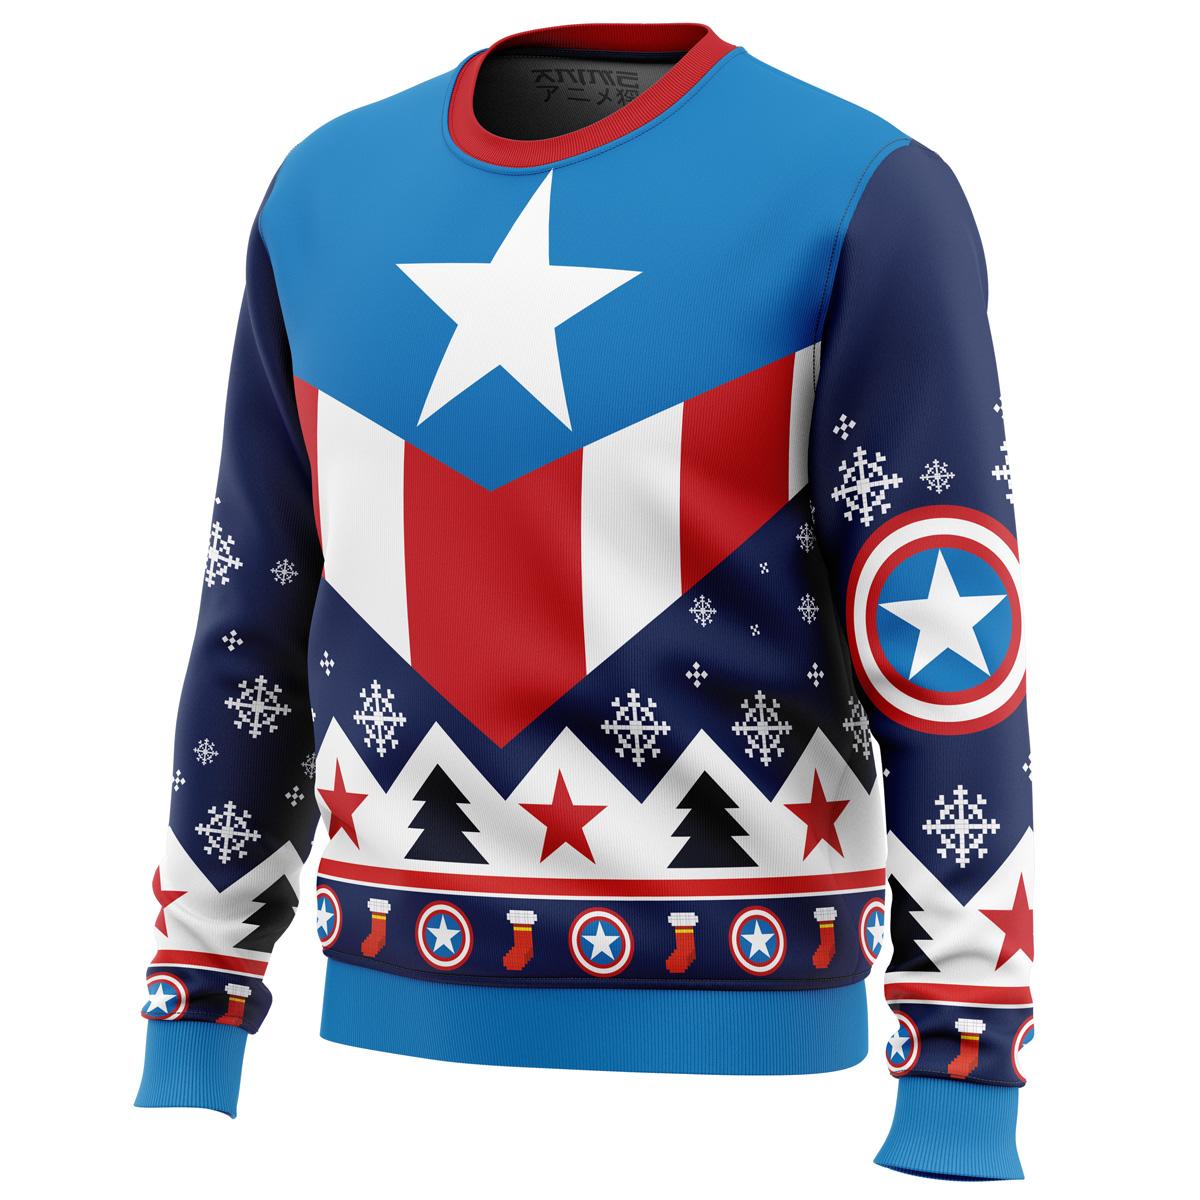 Captain America Ugly Sweater